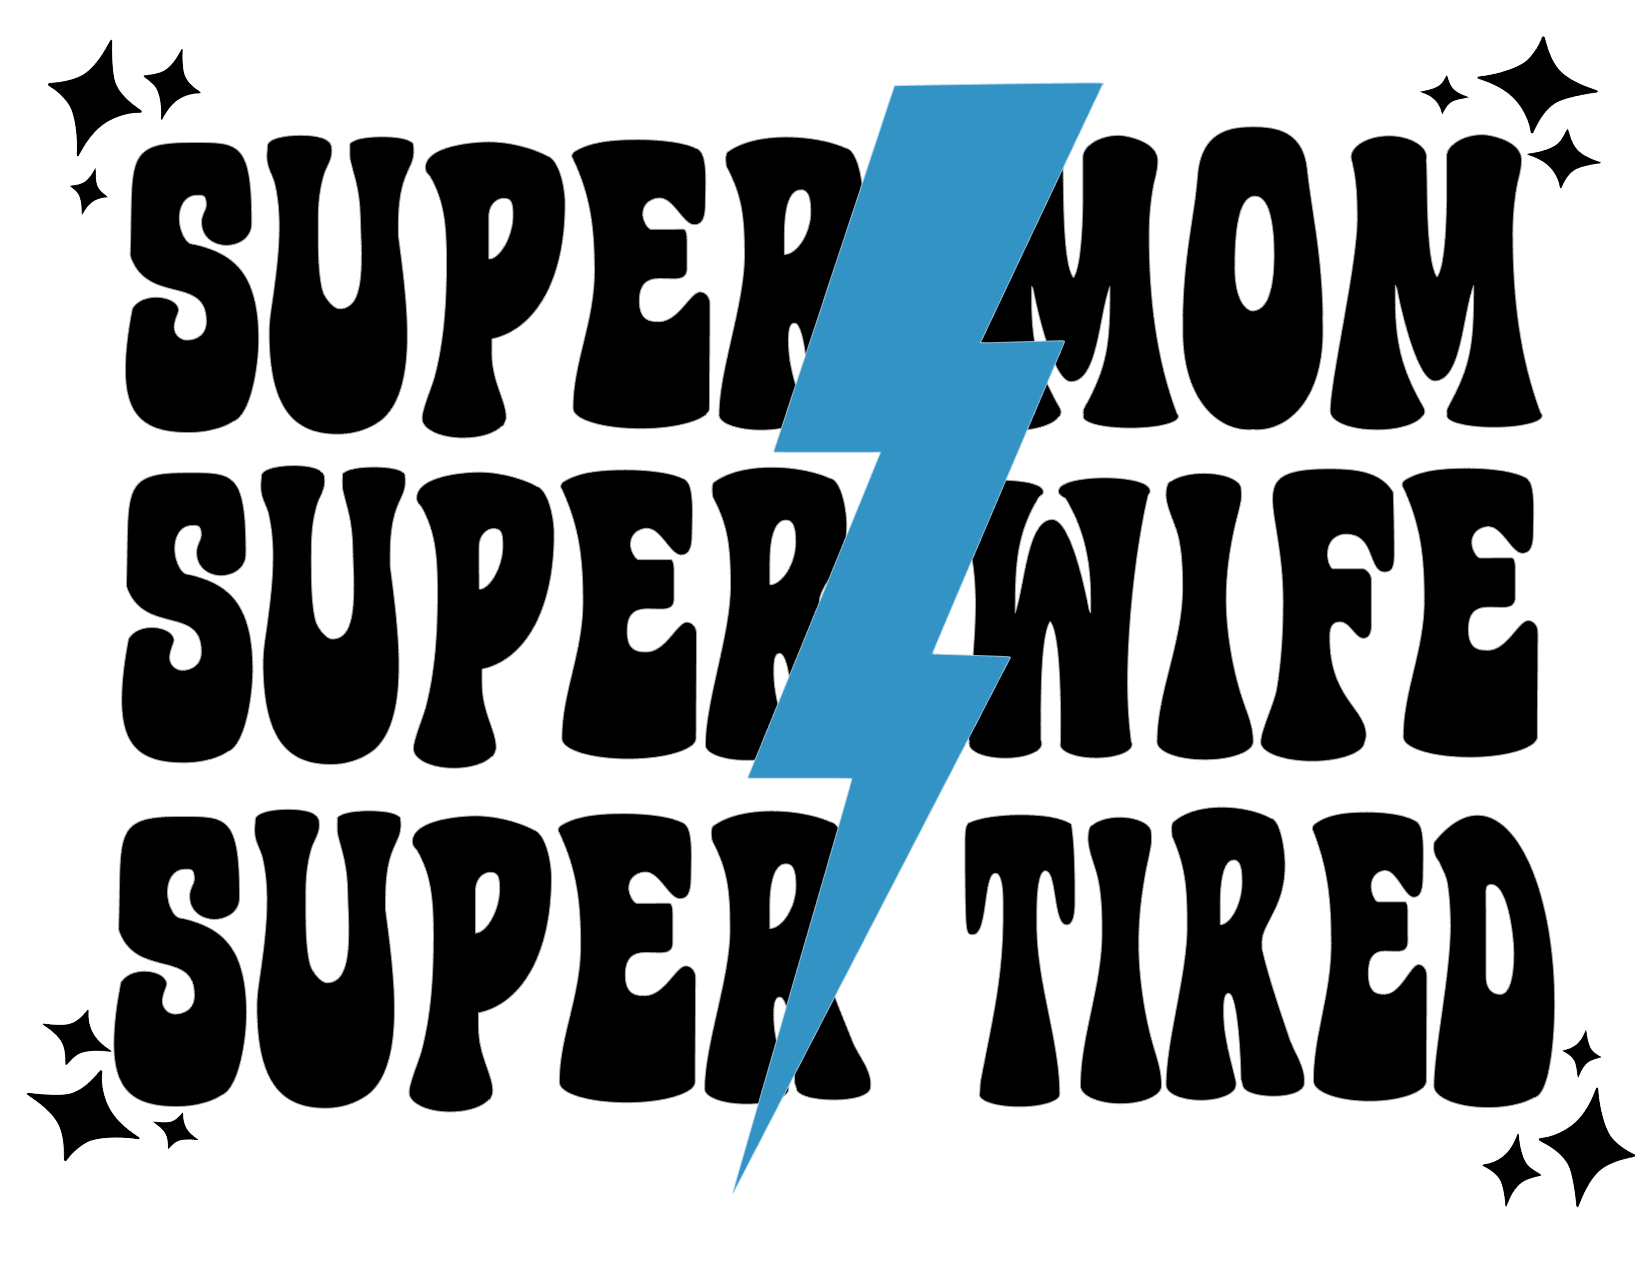 #401 Super Mom Super Wife Super Tired(can me any name)